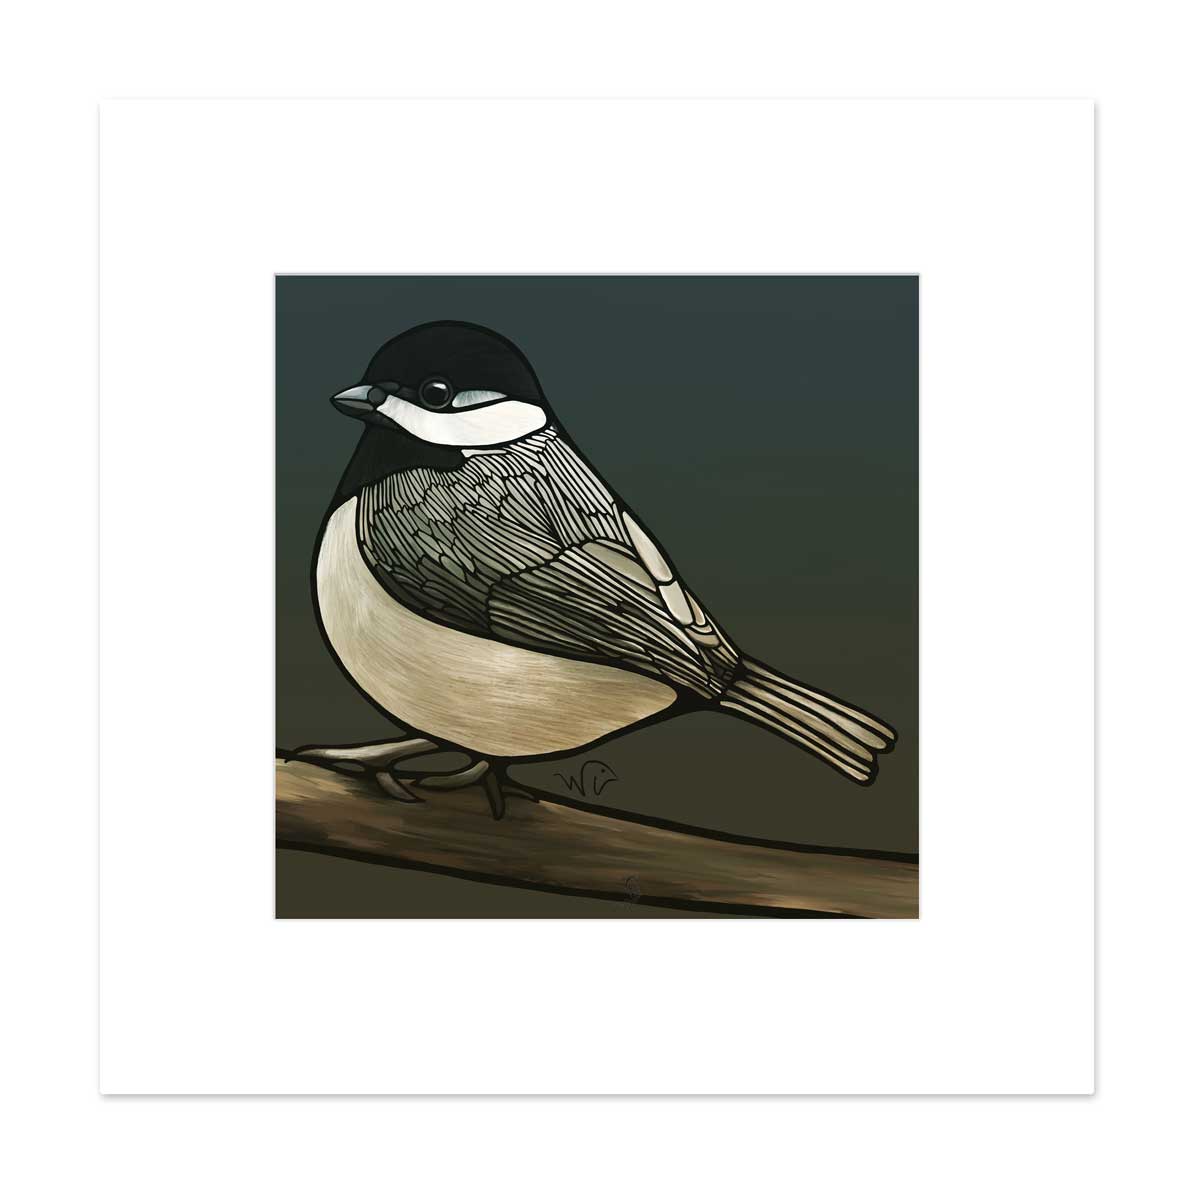 Signed & Matted Print - Black-Capped Chickadee